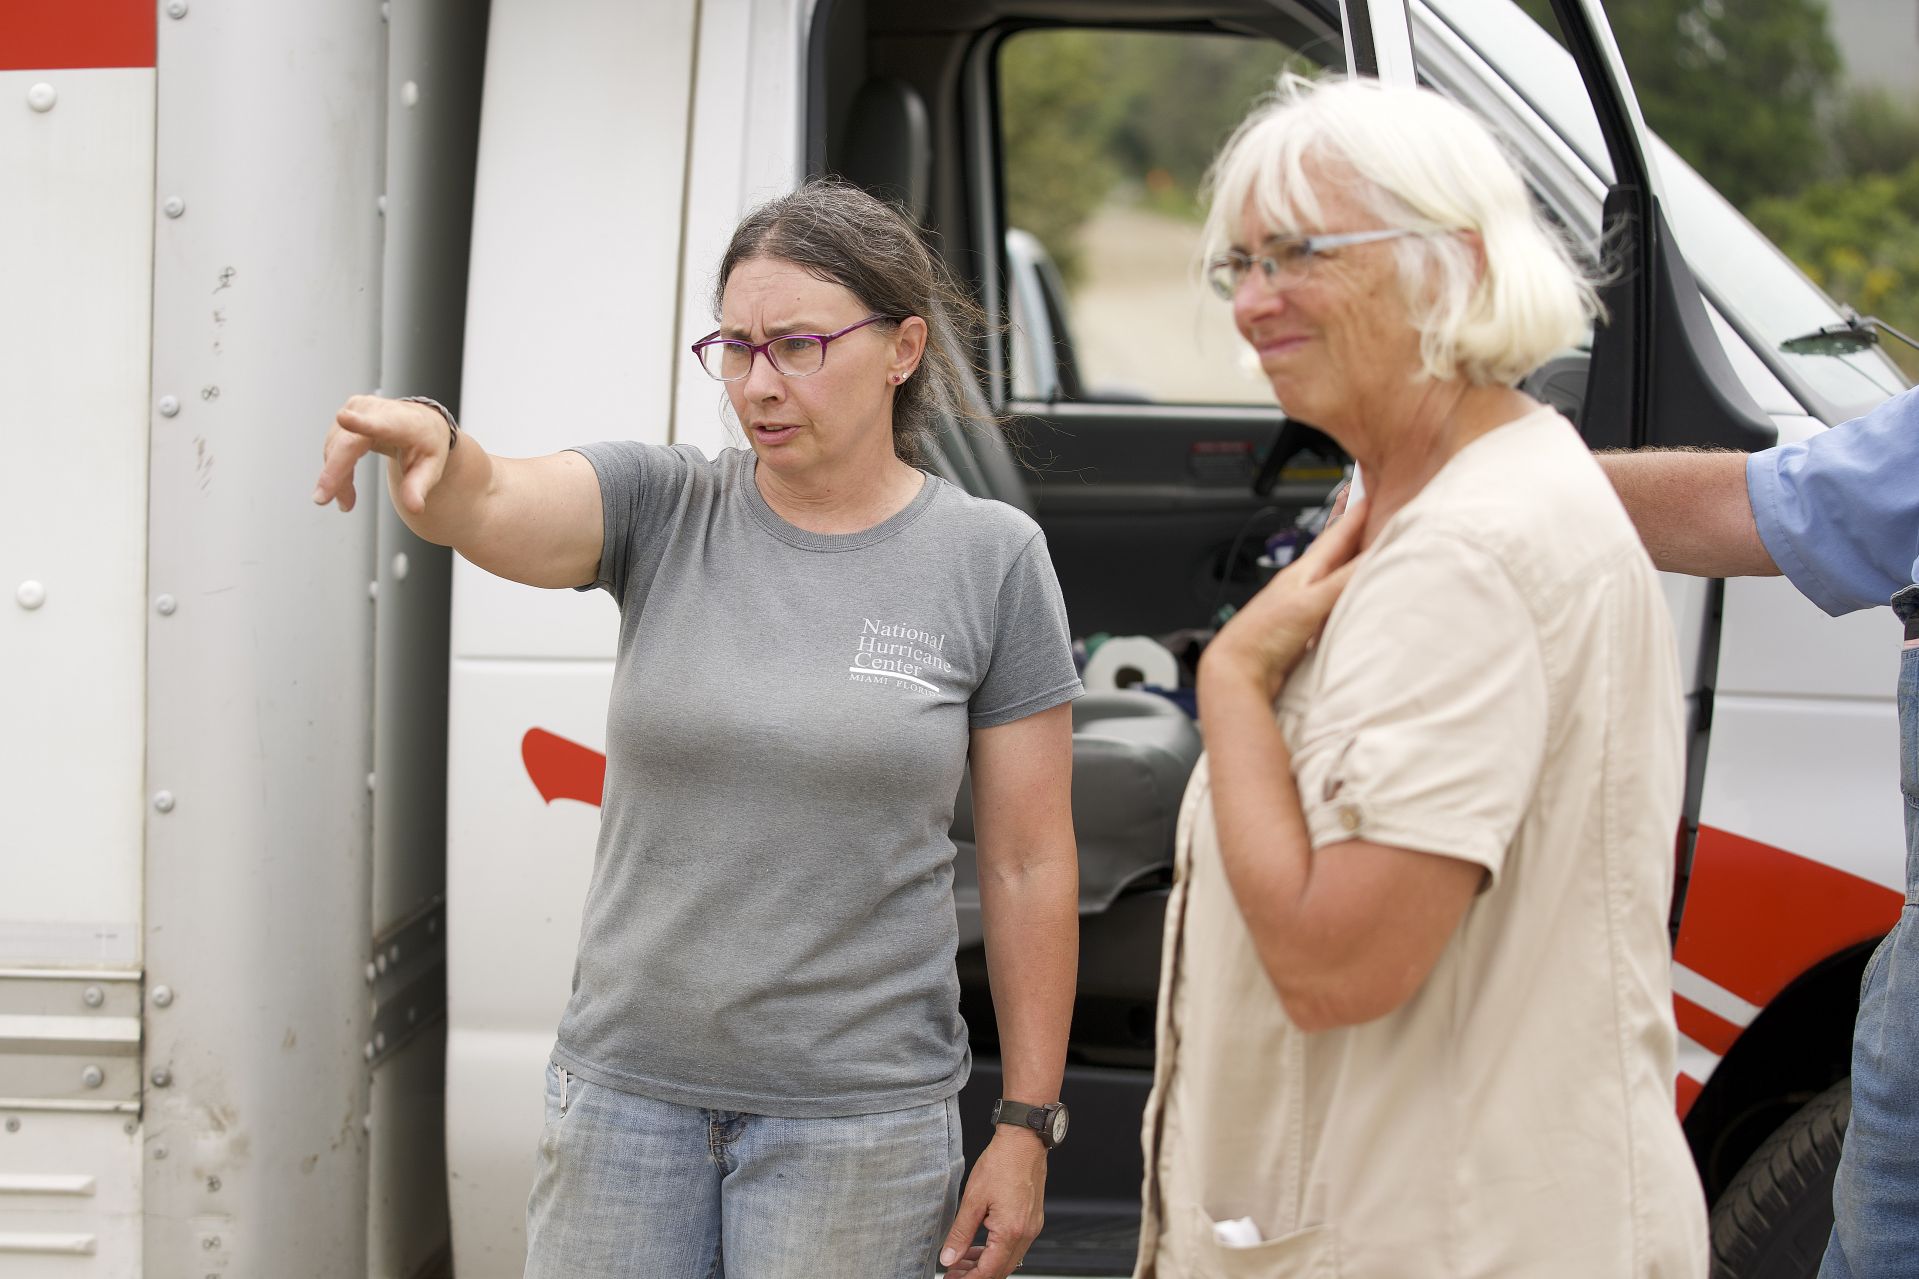 Eva Murray directs the work team during the trash and recycling operation on Matinicus Isle on Aug. 8, 2019. (Theophil Syslo/Bates College)